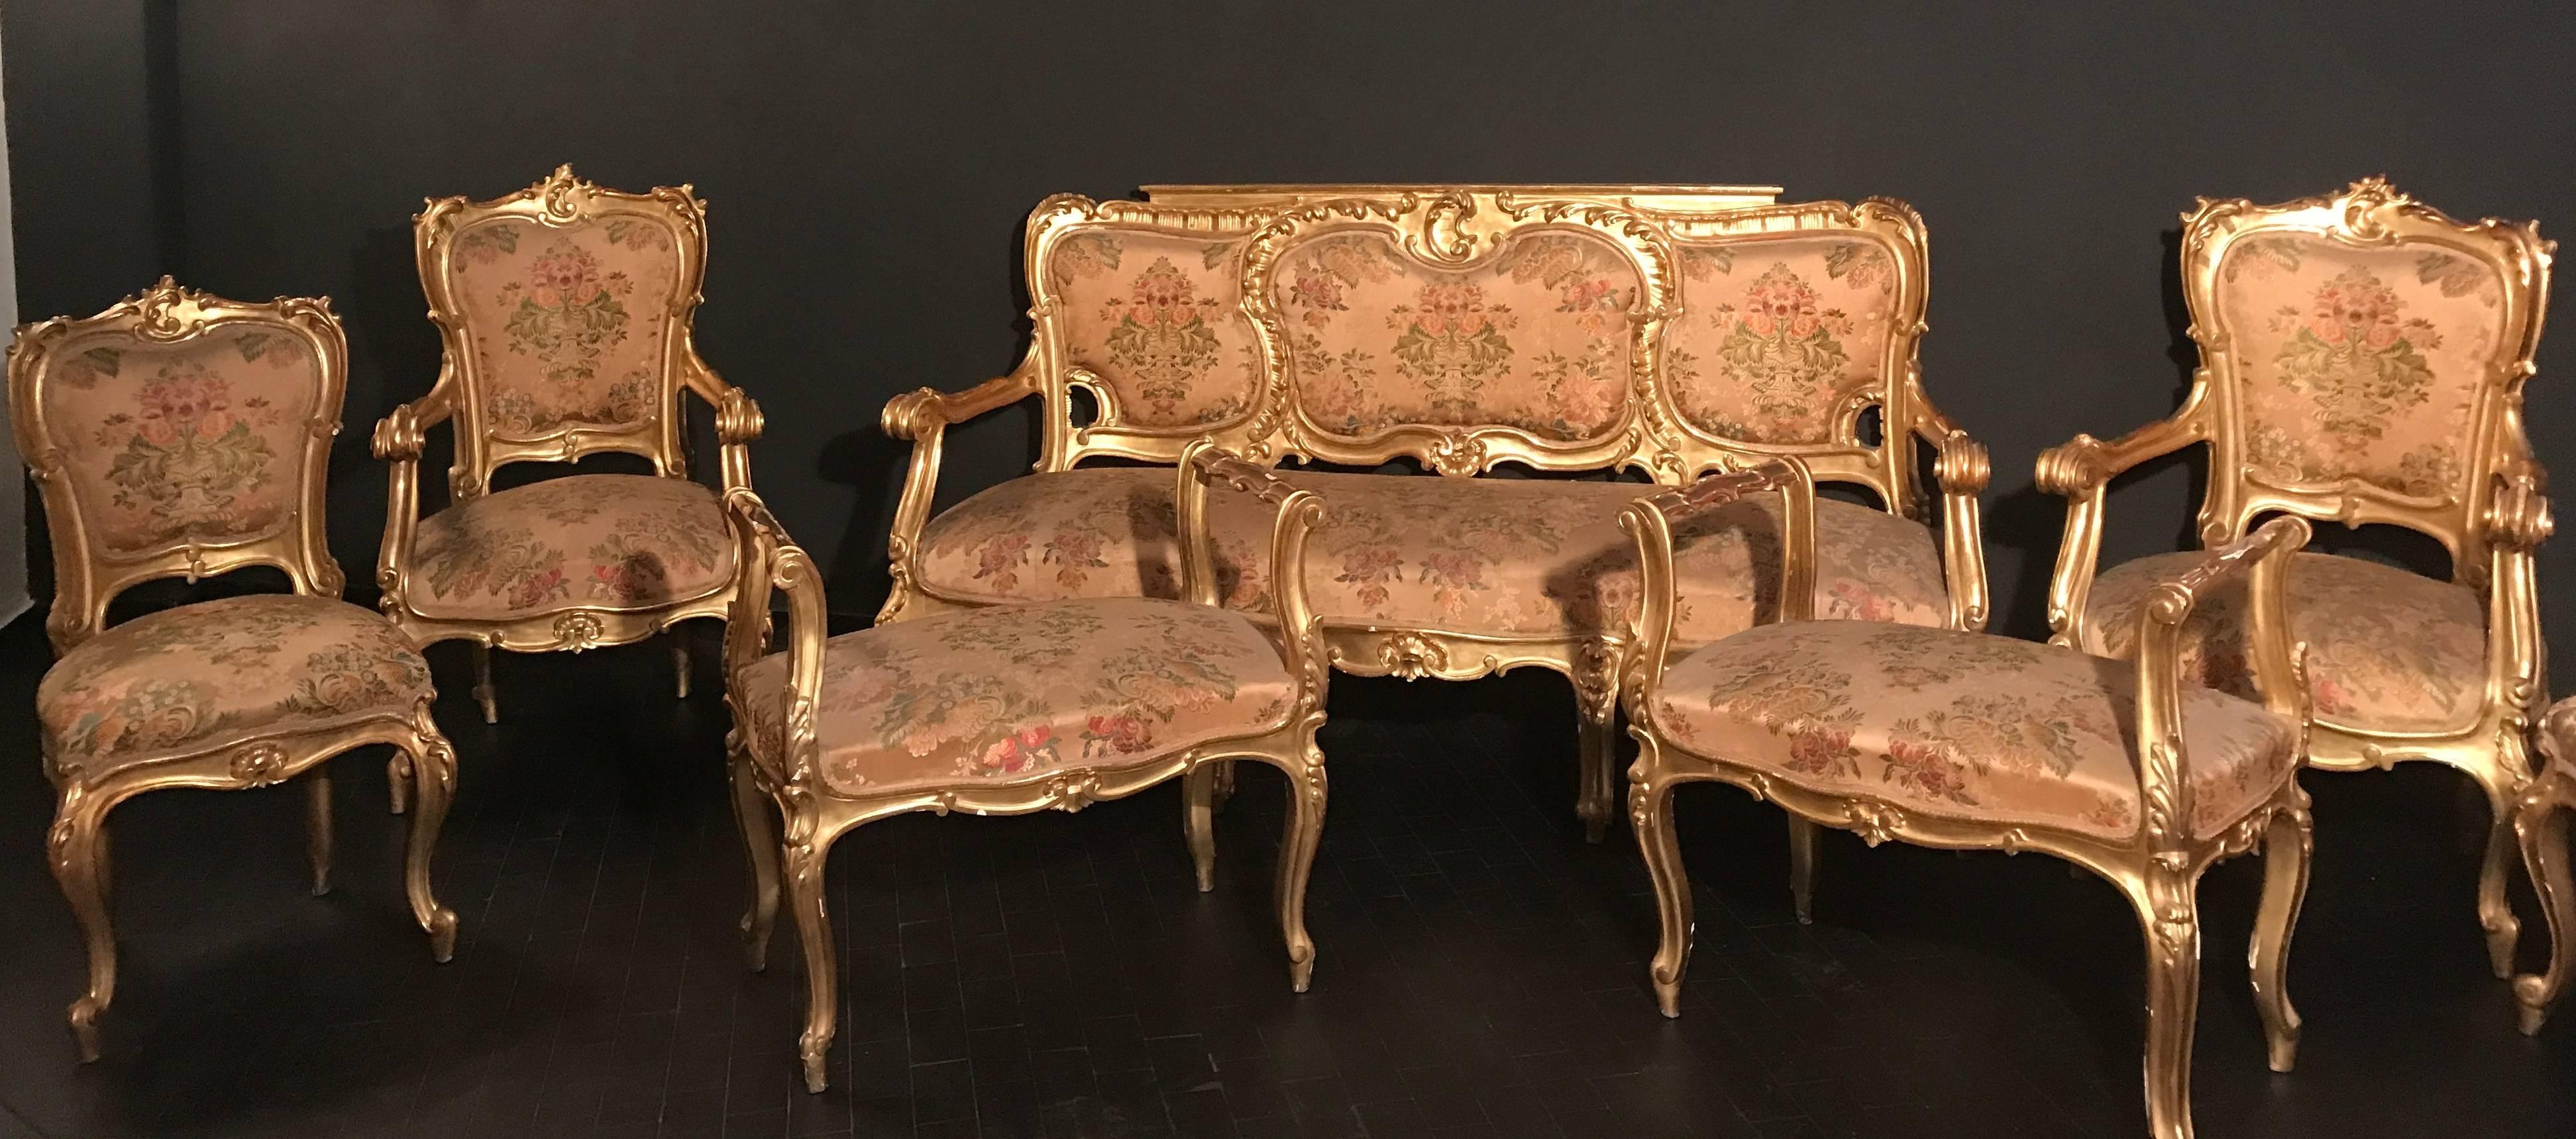 Pair of 19th Century Italian Window Benches or Settees For Sale 5